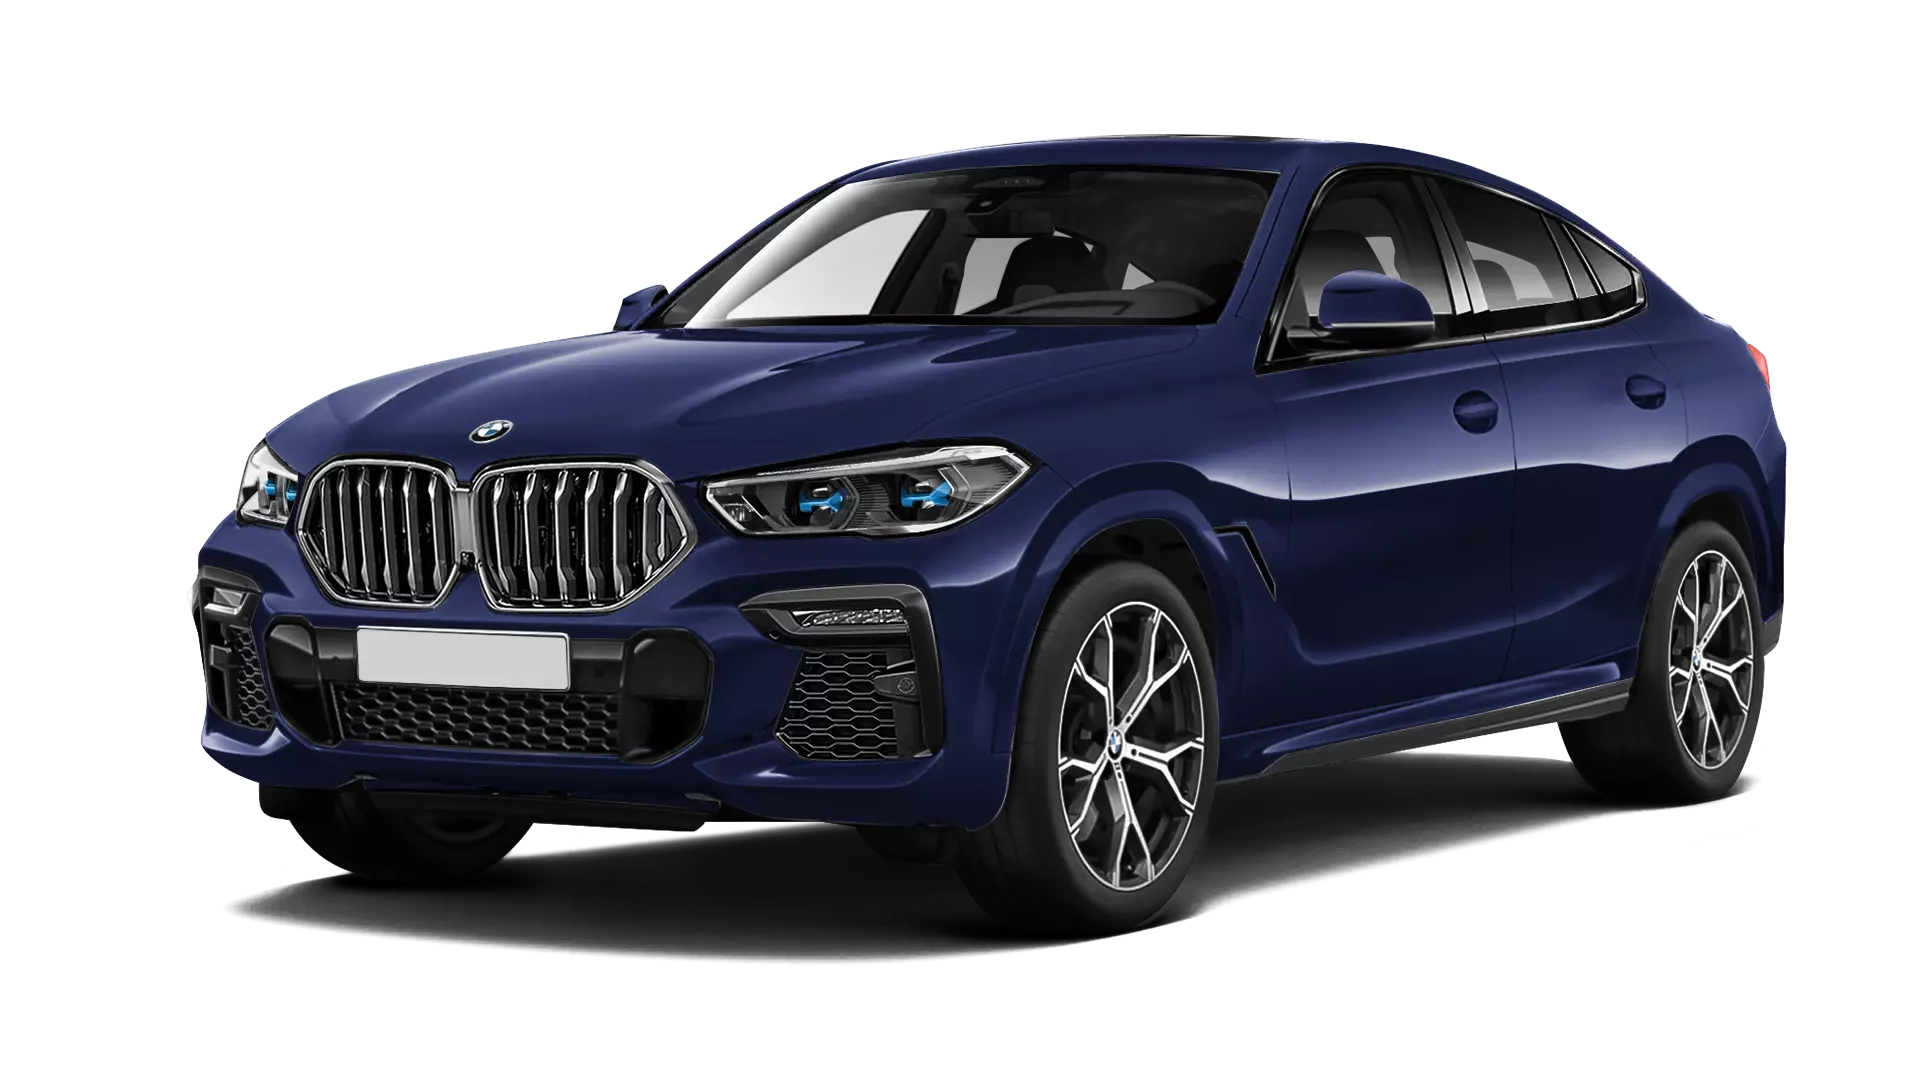 BMW X6 G06 stock front view in Tanzanite Blue color